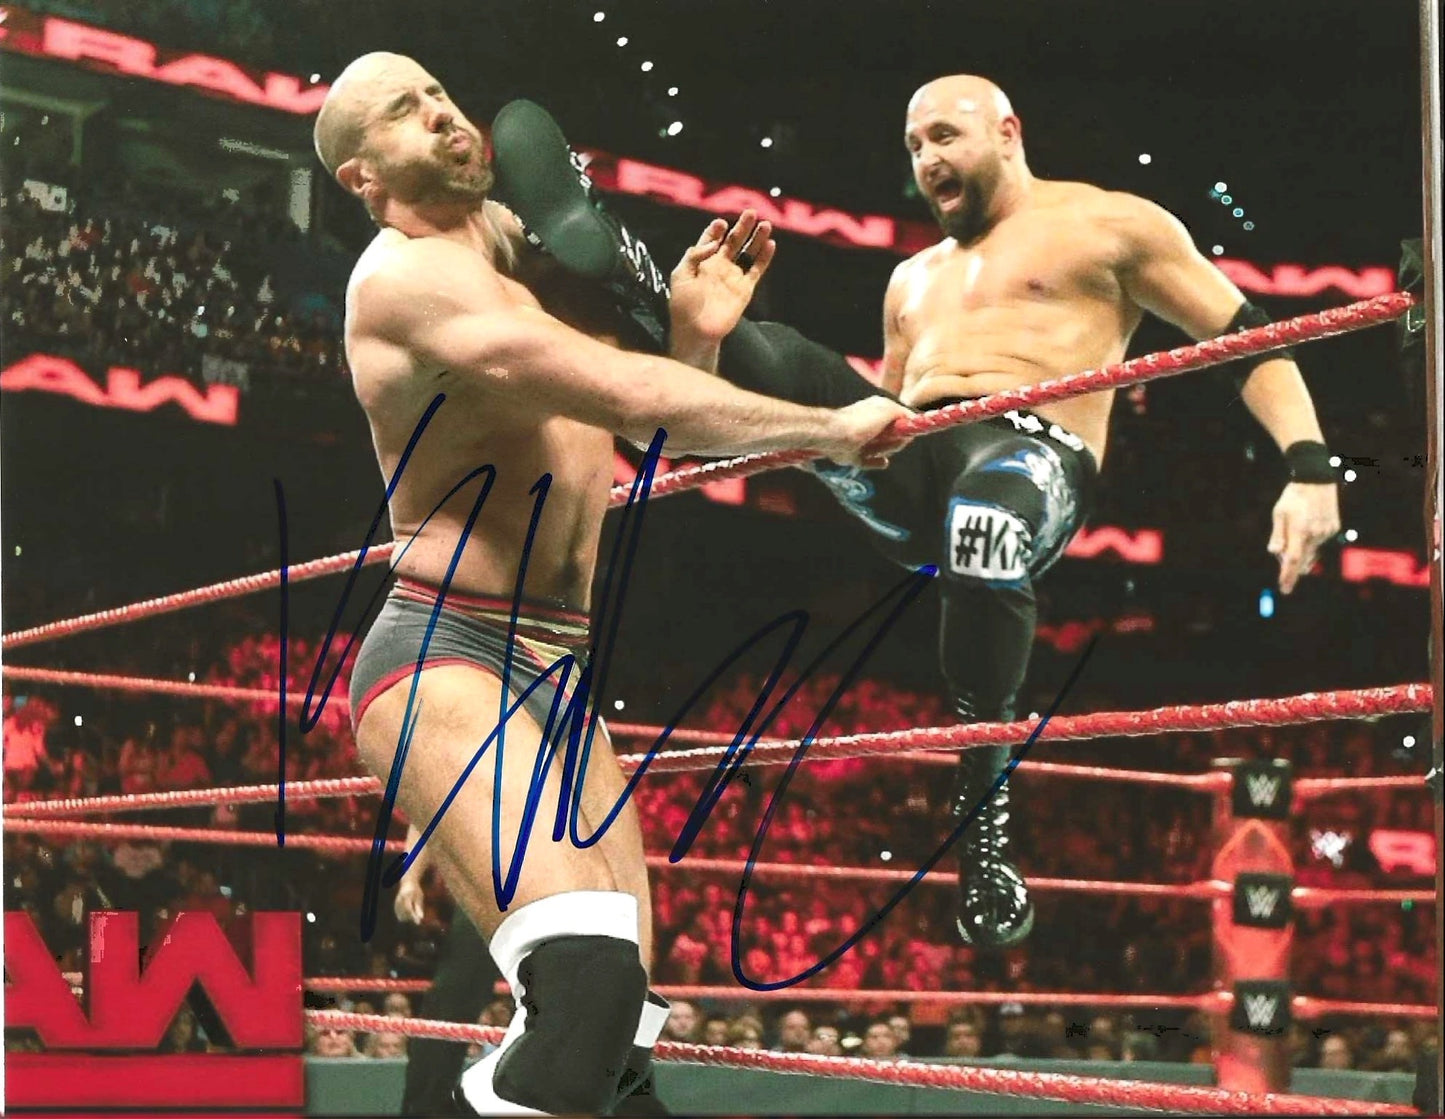 Karl Anderson Autographed Signed "WWE" 8X10 Photo Elite Promotions & Graphz Authentication